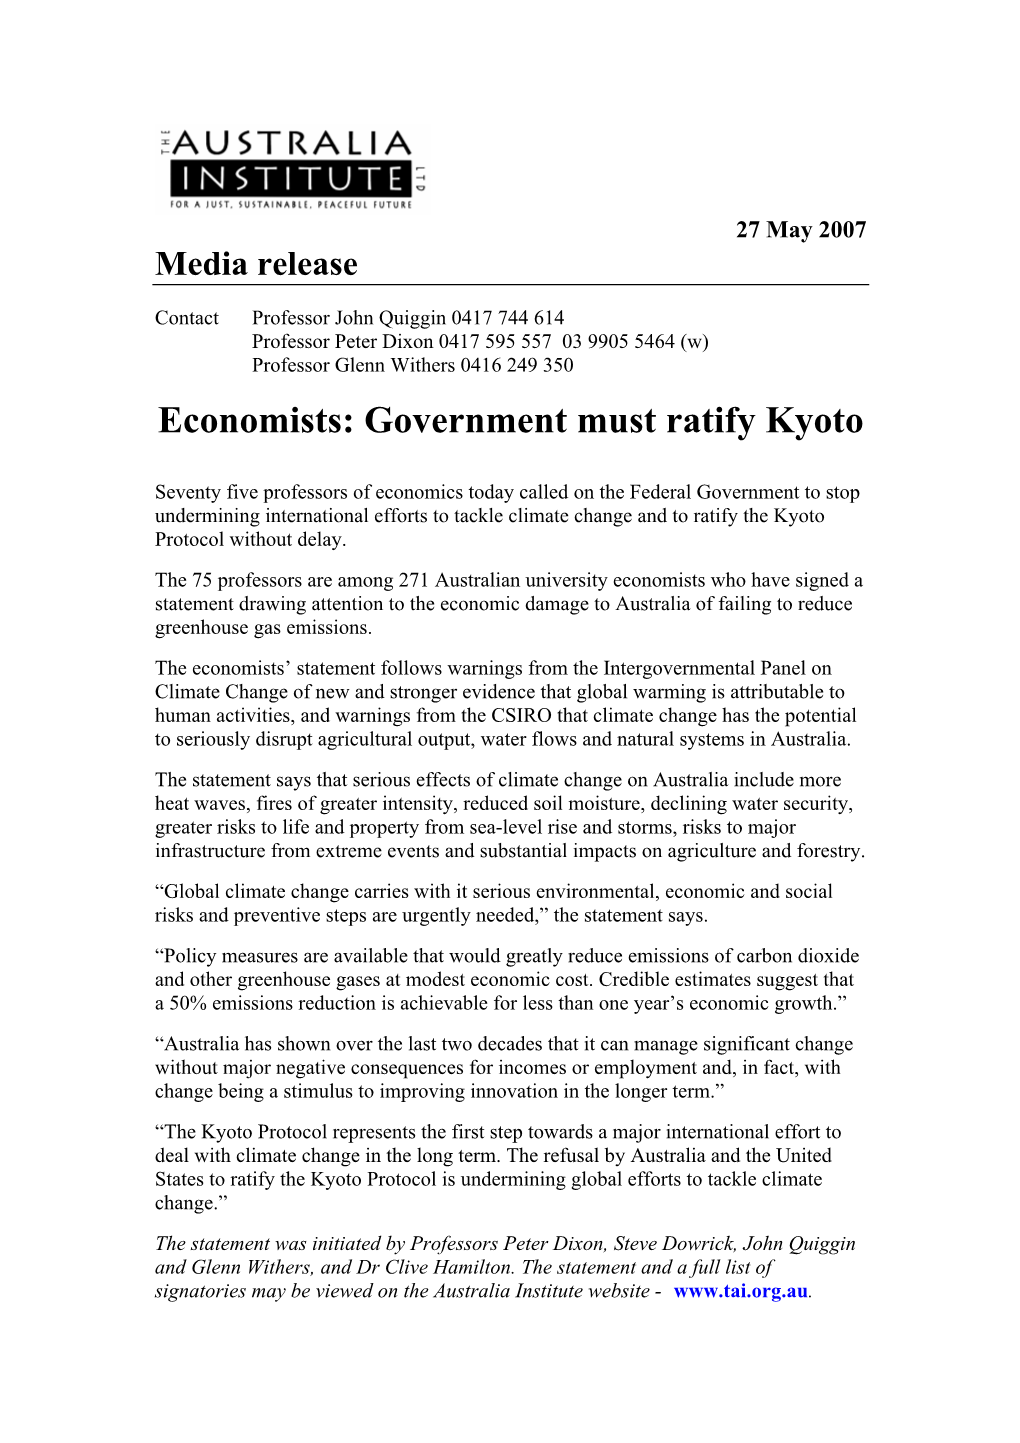 Economists: Government Must Ratify Kyoto